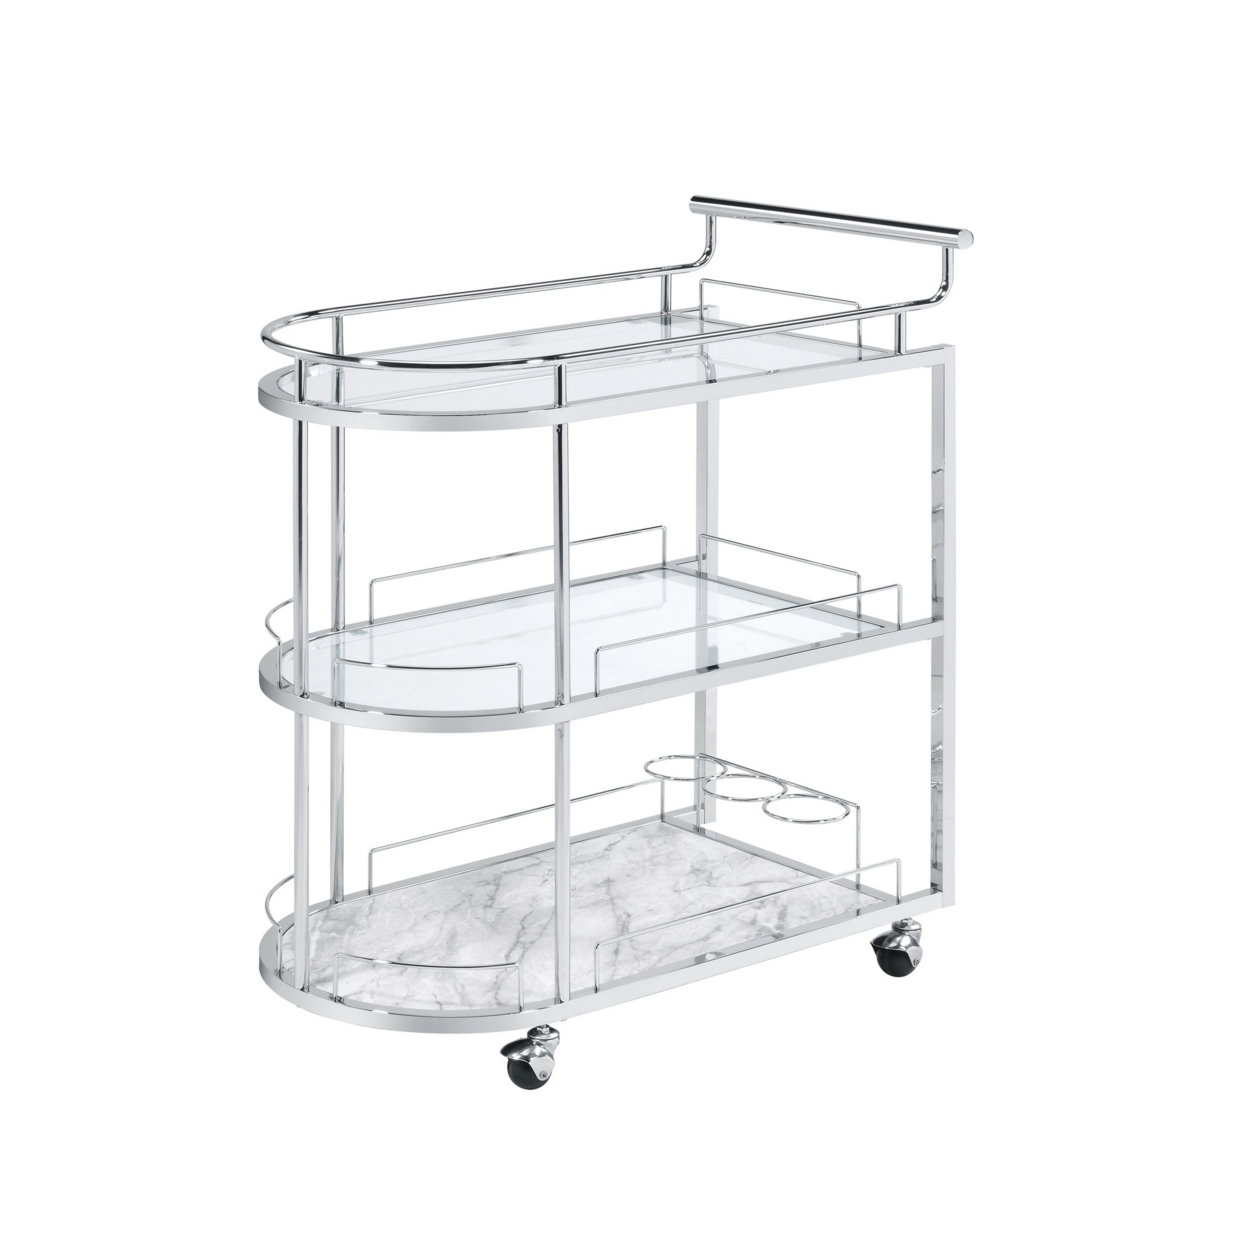 Serving Cart With Oval Shape And Metal Bar Handle, Silver- Saltoro Sherpi